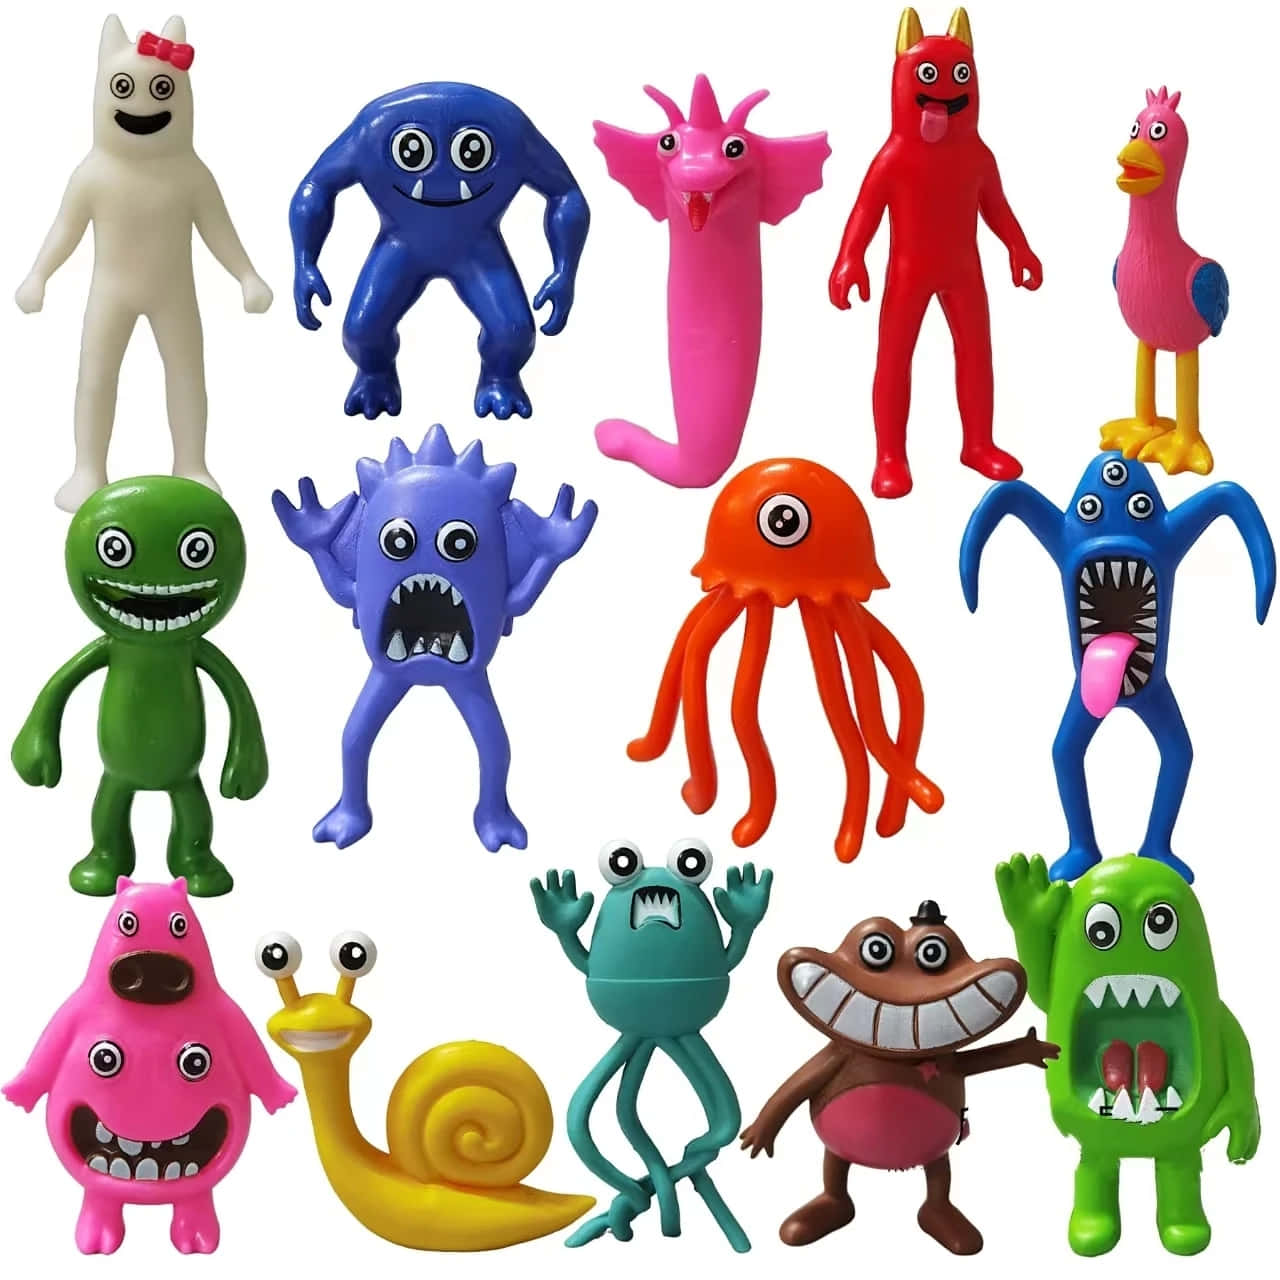 Colorful Cartoon Monster Figures Collection Wallpaper